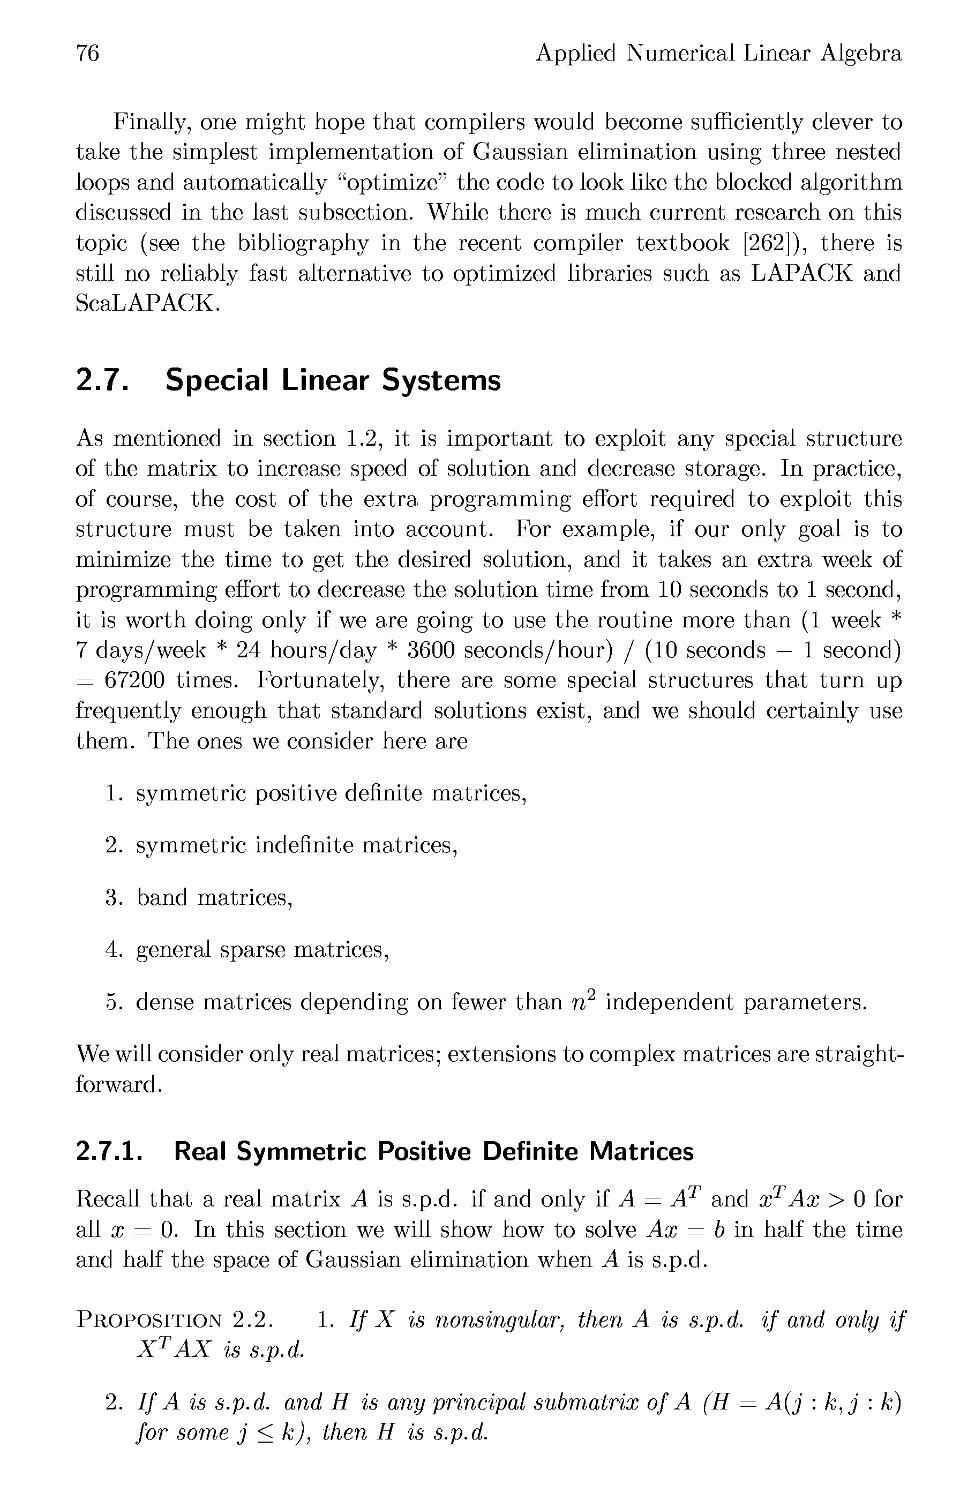 2.7 Special Linear Systems